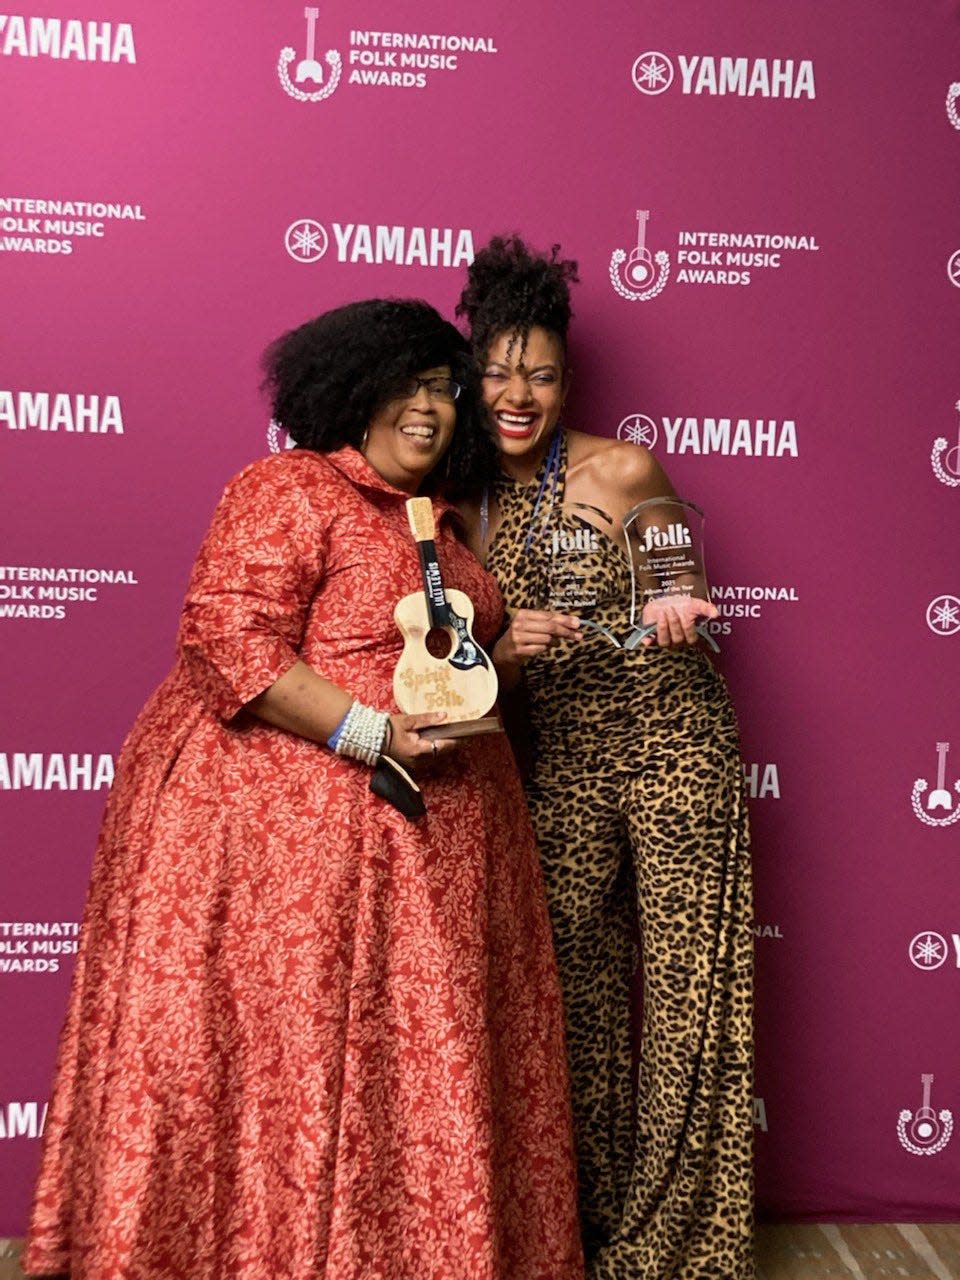 Lili Lewis, photographed with her Spirit of Folk Award, alongside two-time winner Allison Russell, at the 2022 International Folk Music Awards